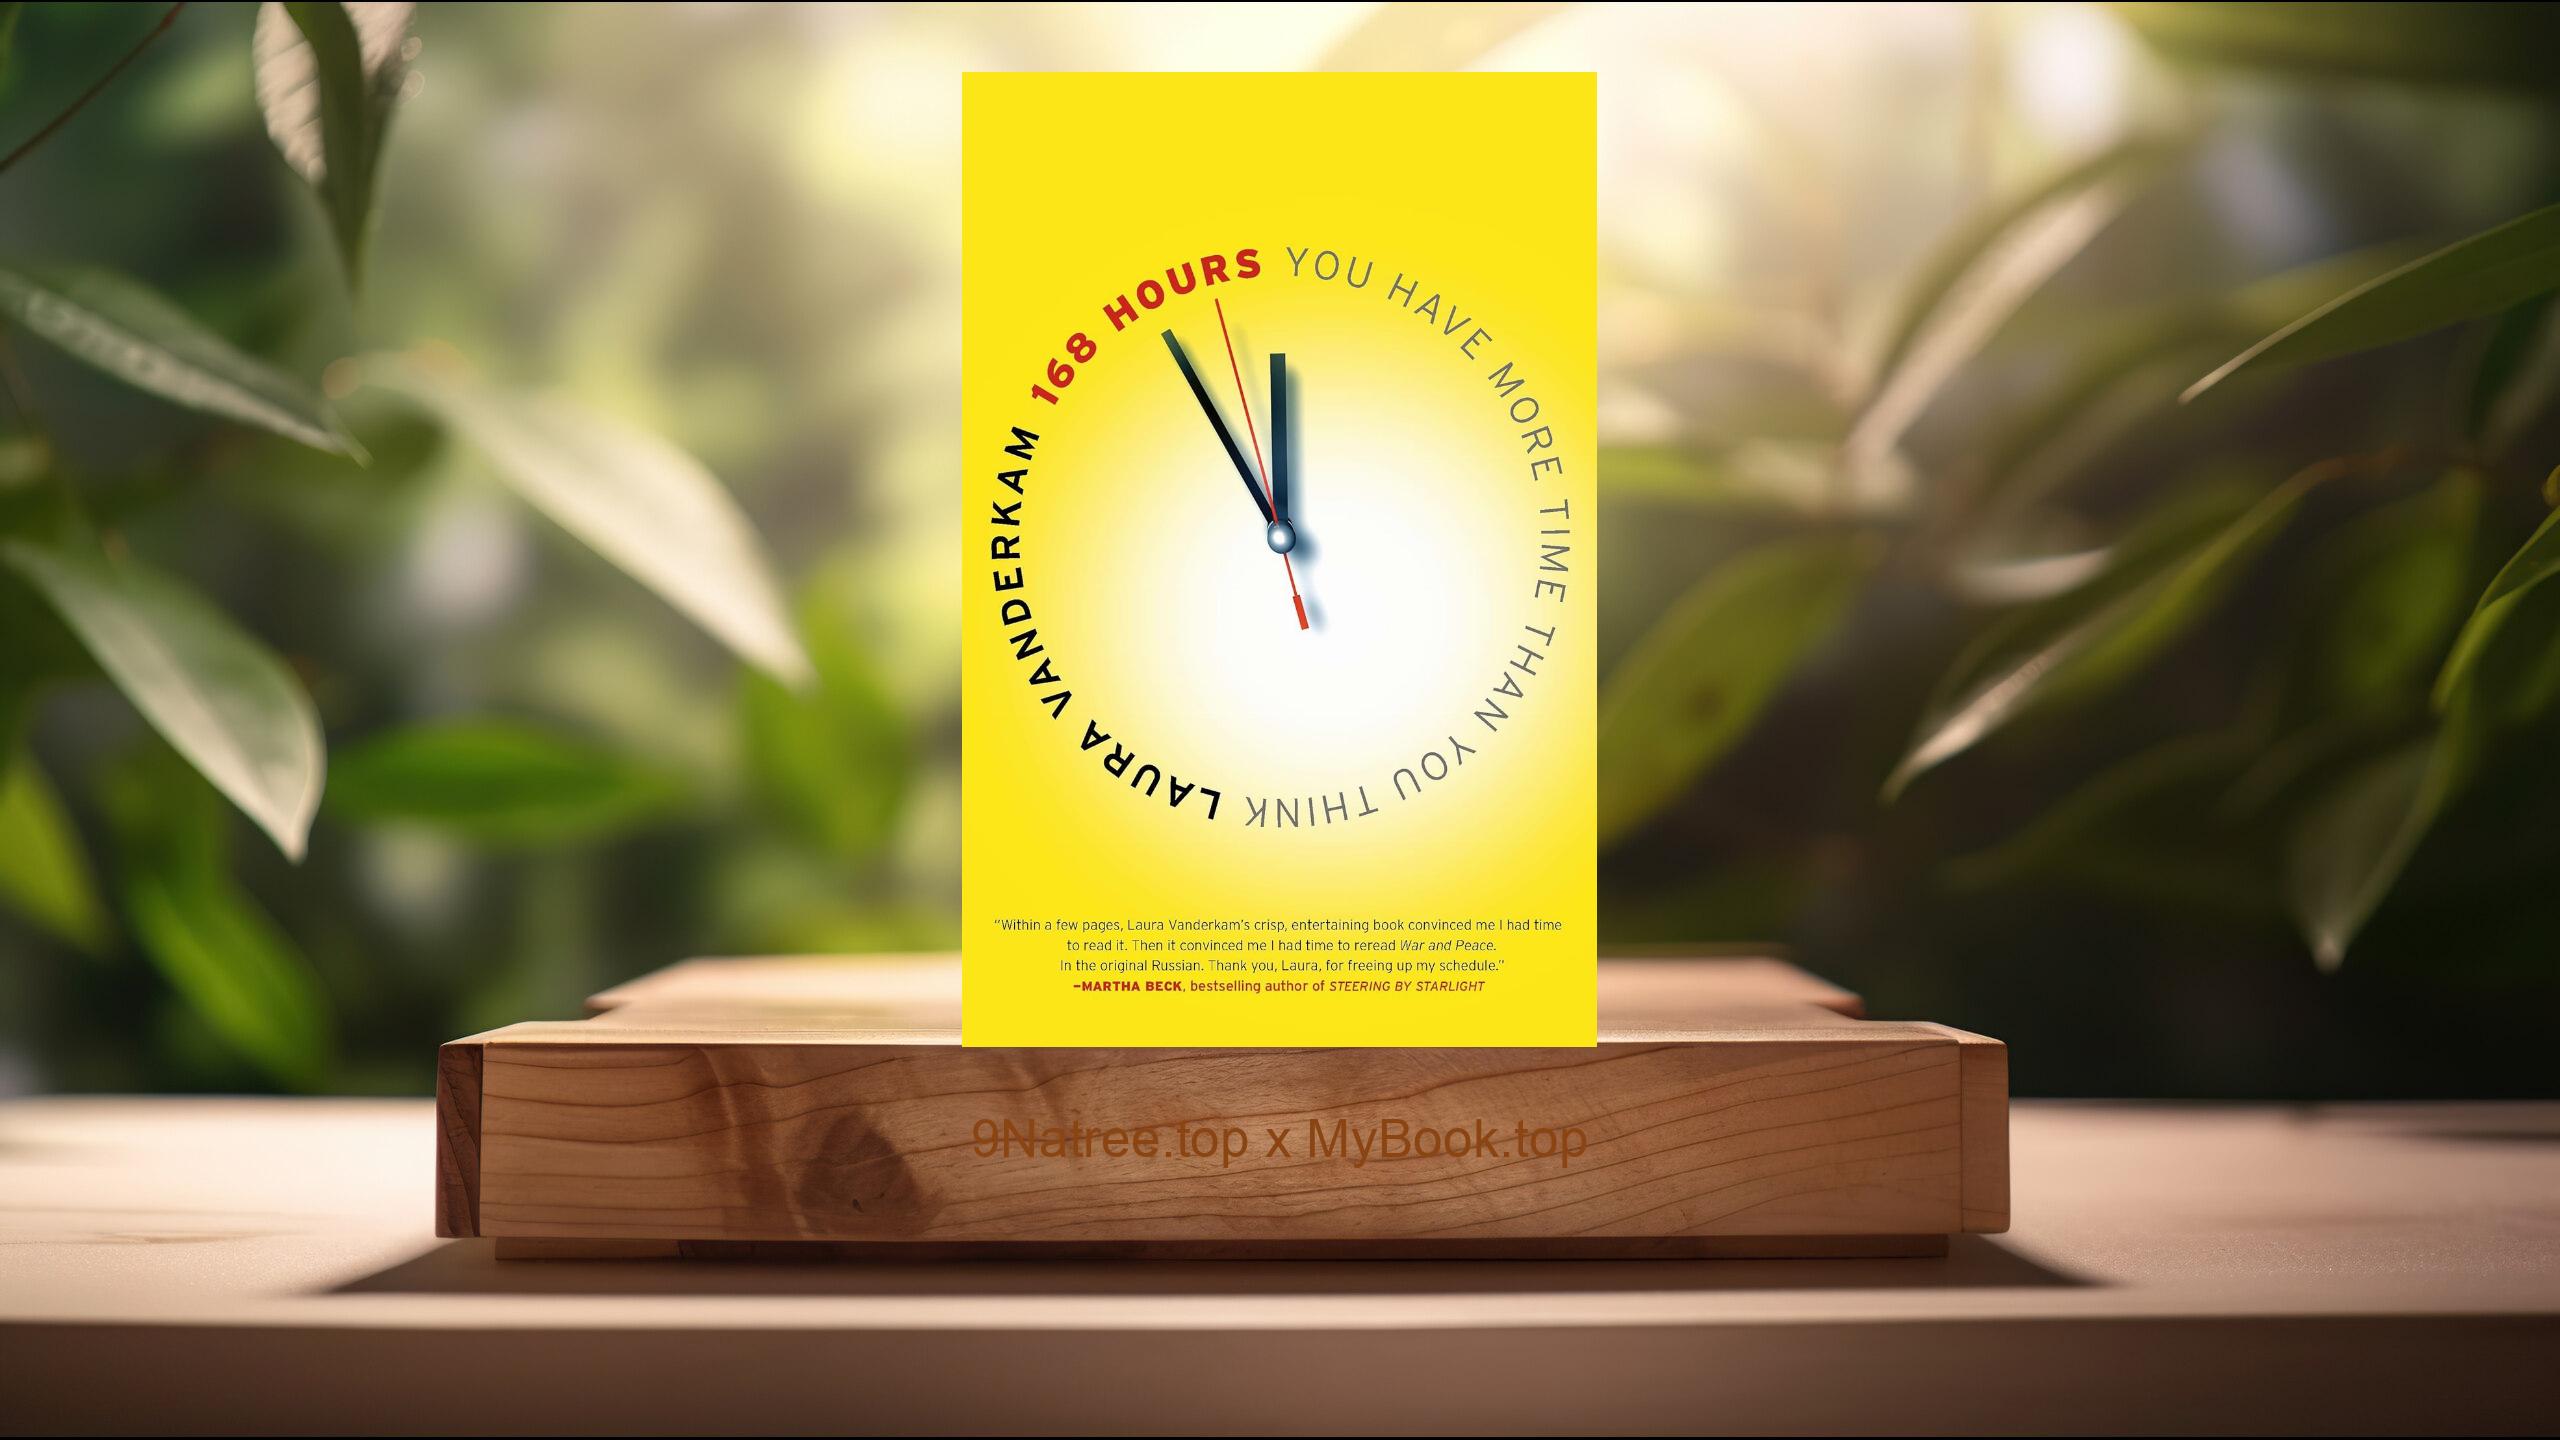 [Review] 168 Hours: You Have More Time Than You Think (Laura Vanderkam) Summarized